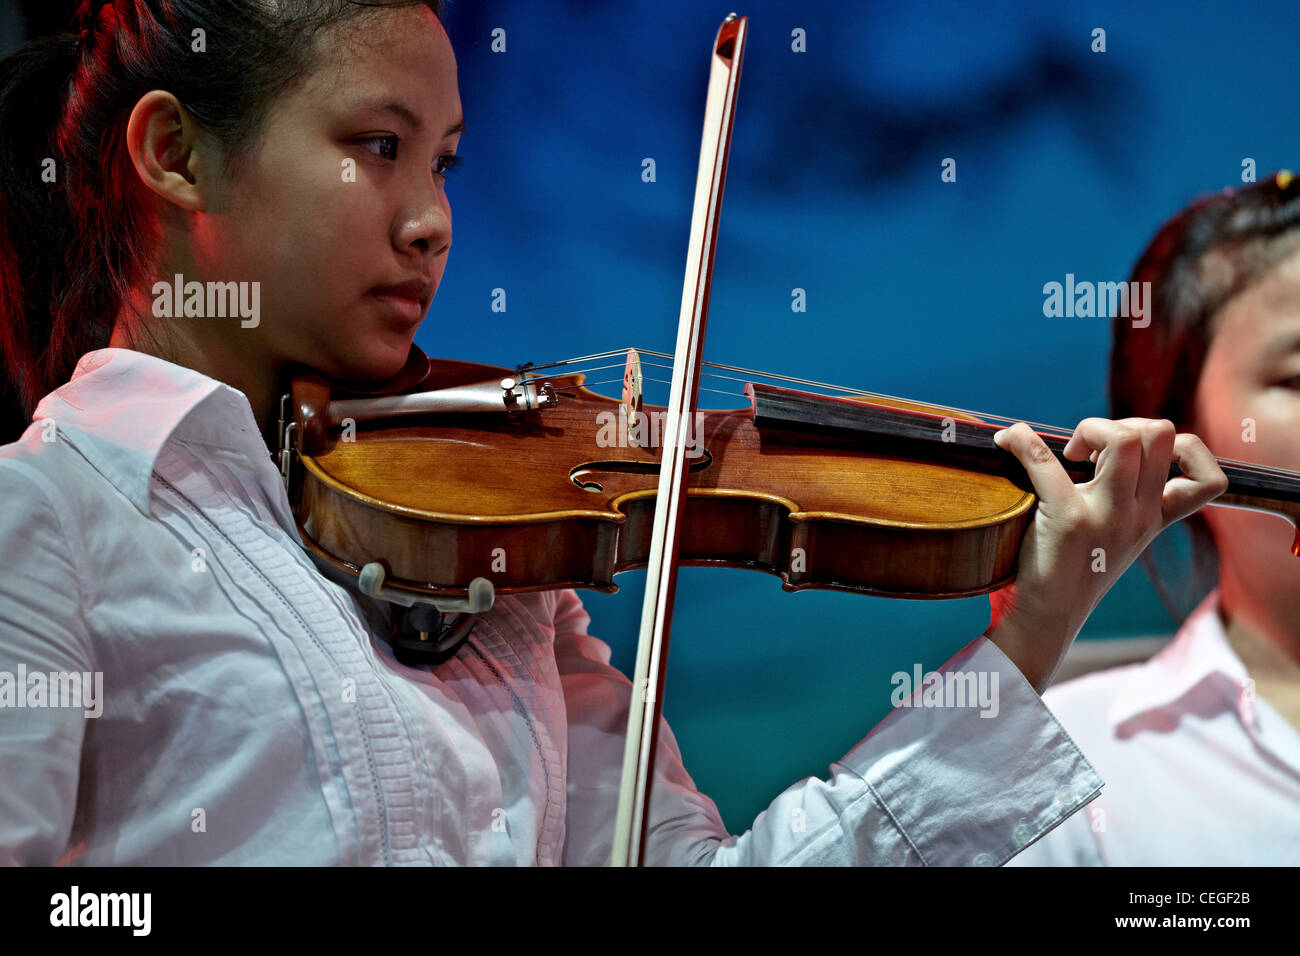 Girl playing violin on stage Stock Photo